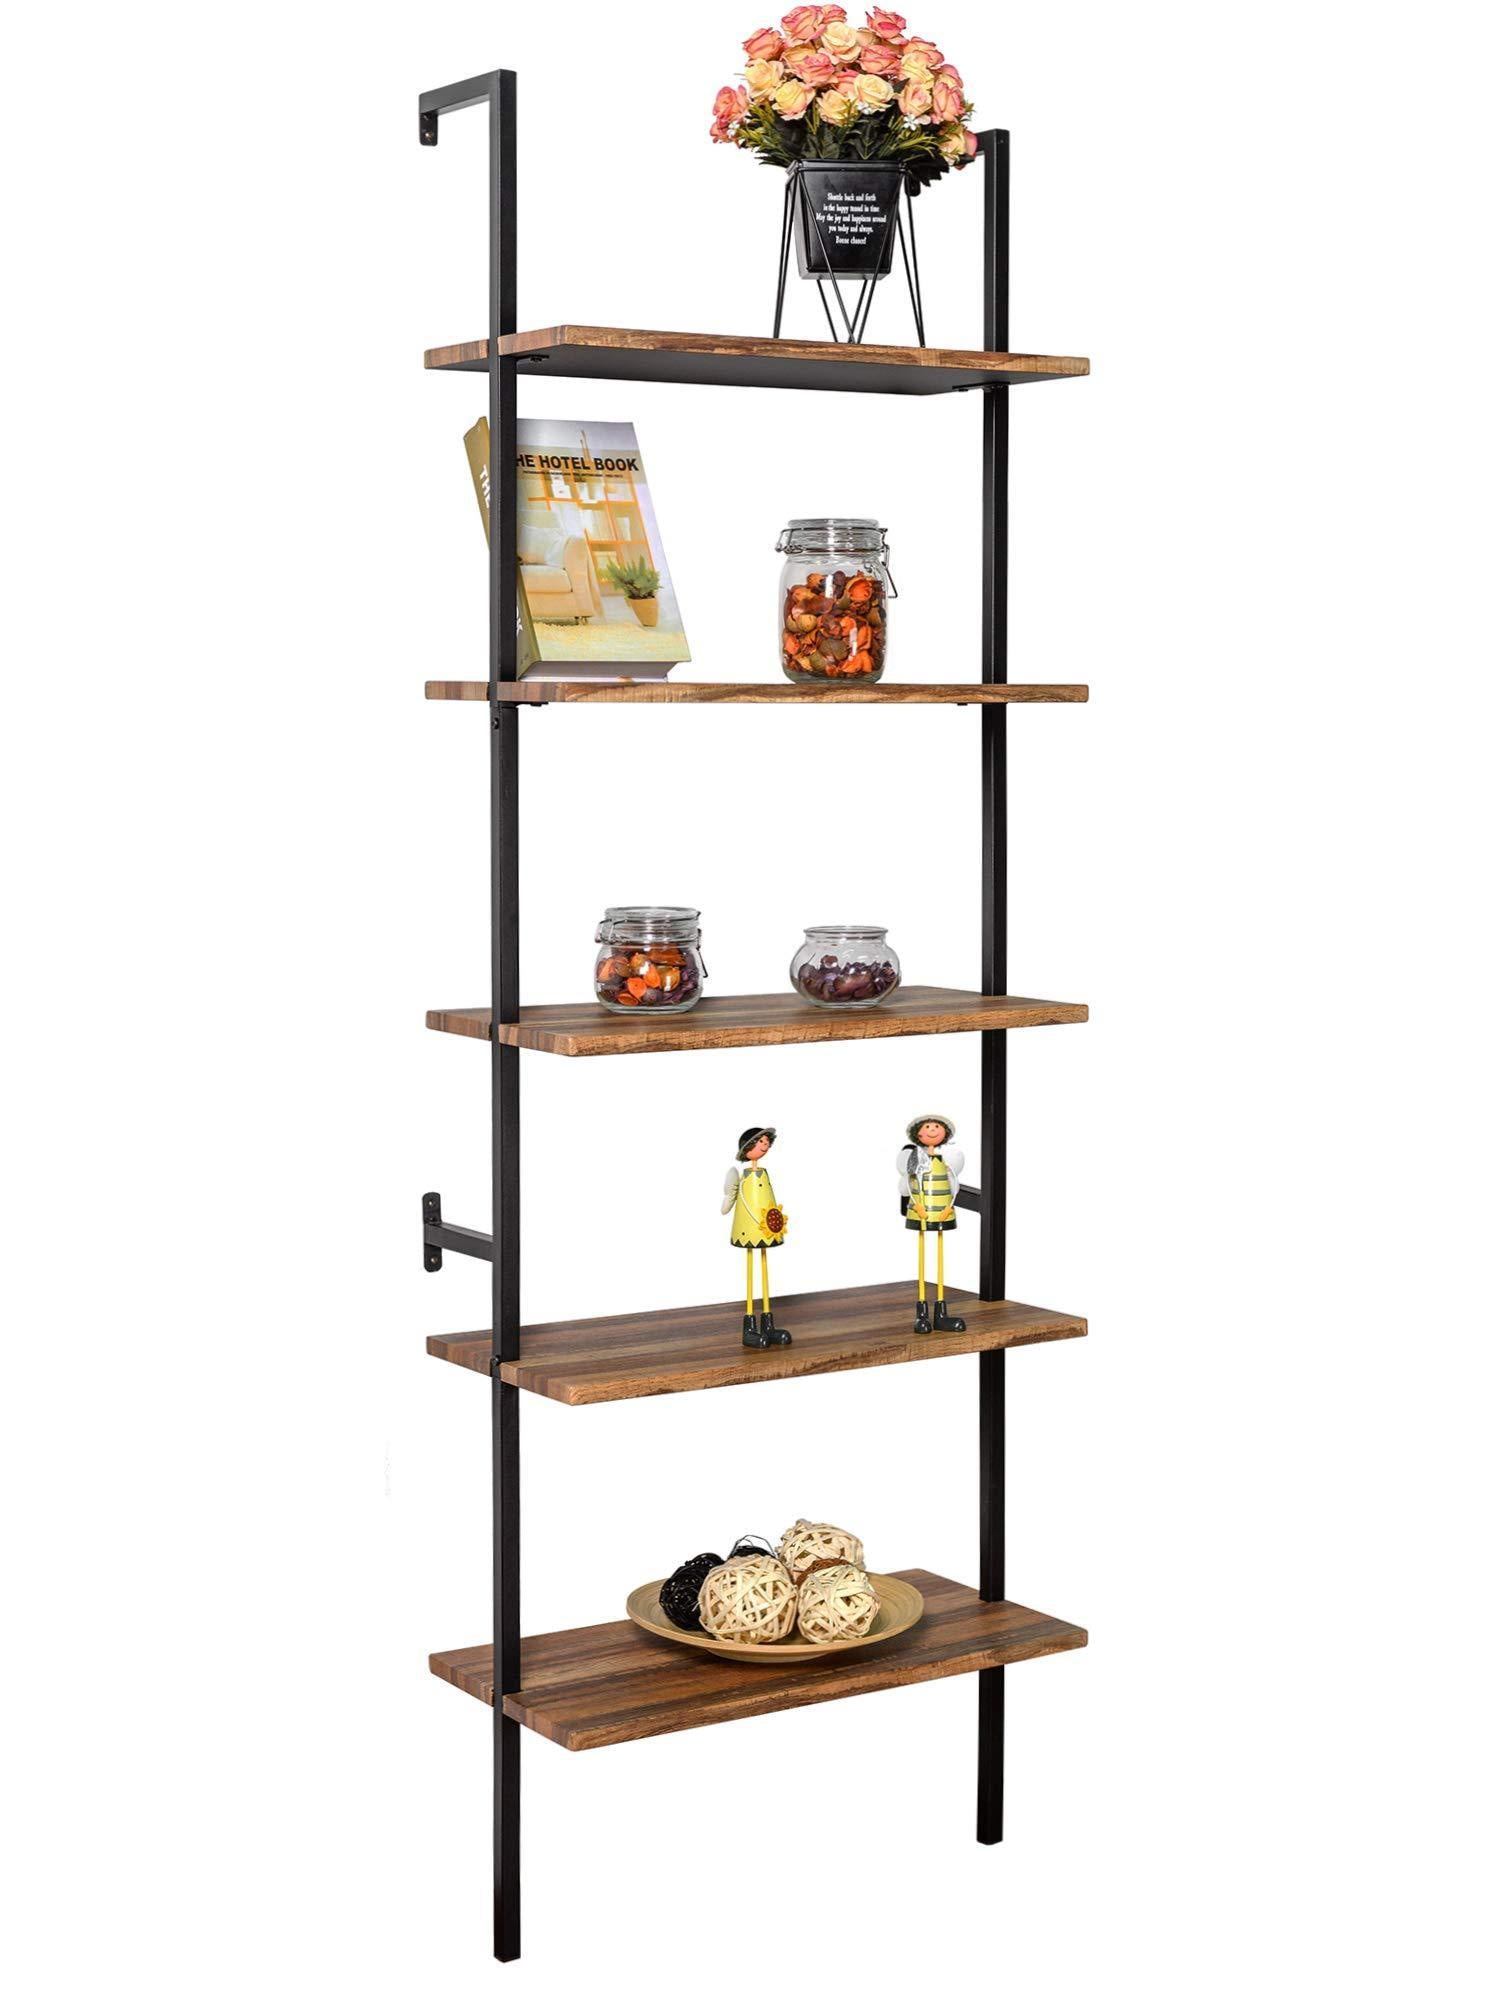 Shop for ironck industrial ladder shelf bookcase 5 tier wood shelves wall mounted stable expand space bookshelf retro wall decor furniture for living room kitchen bar storage